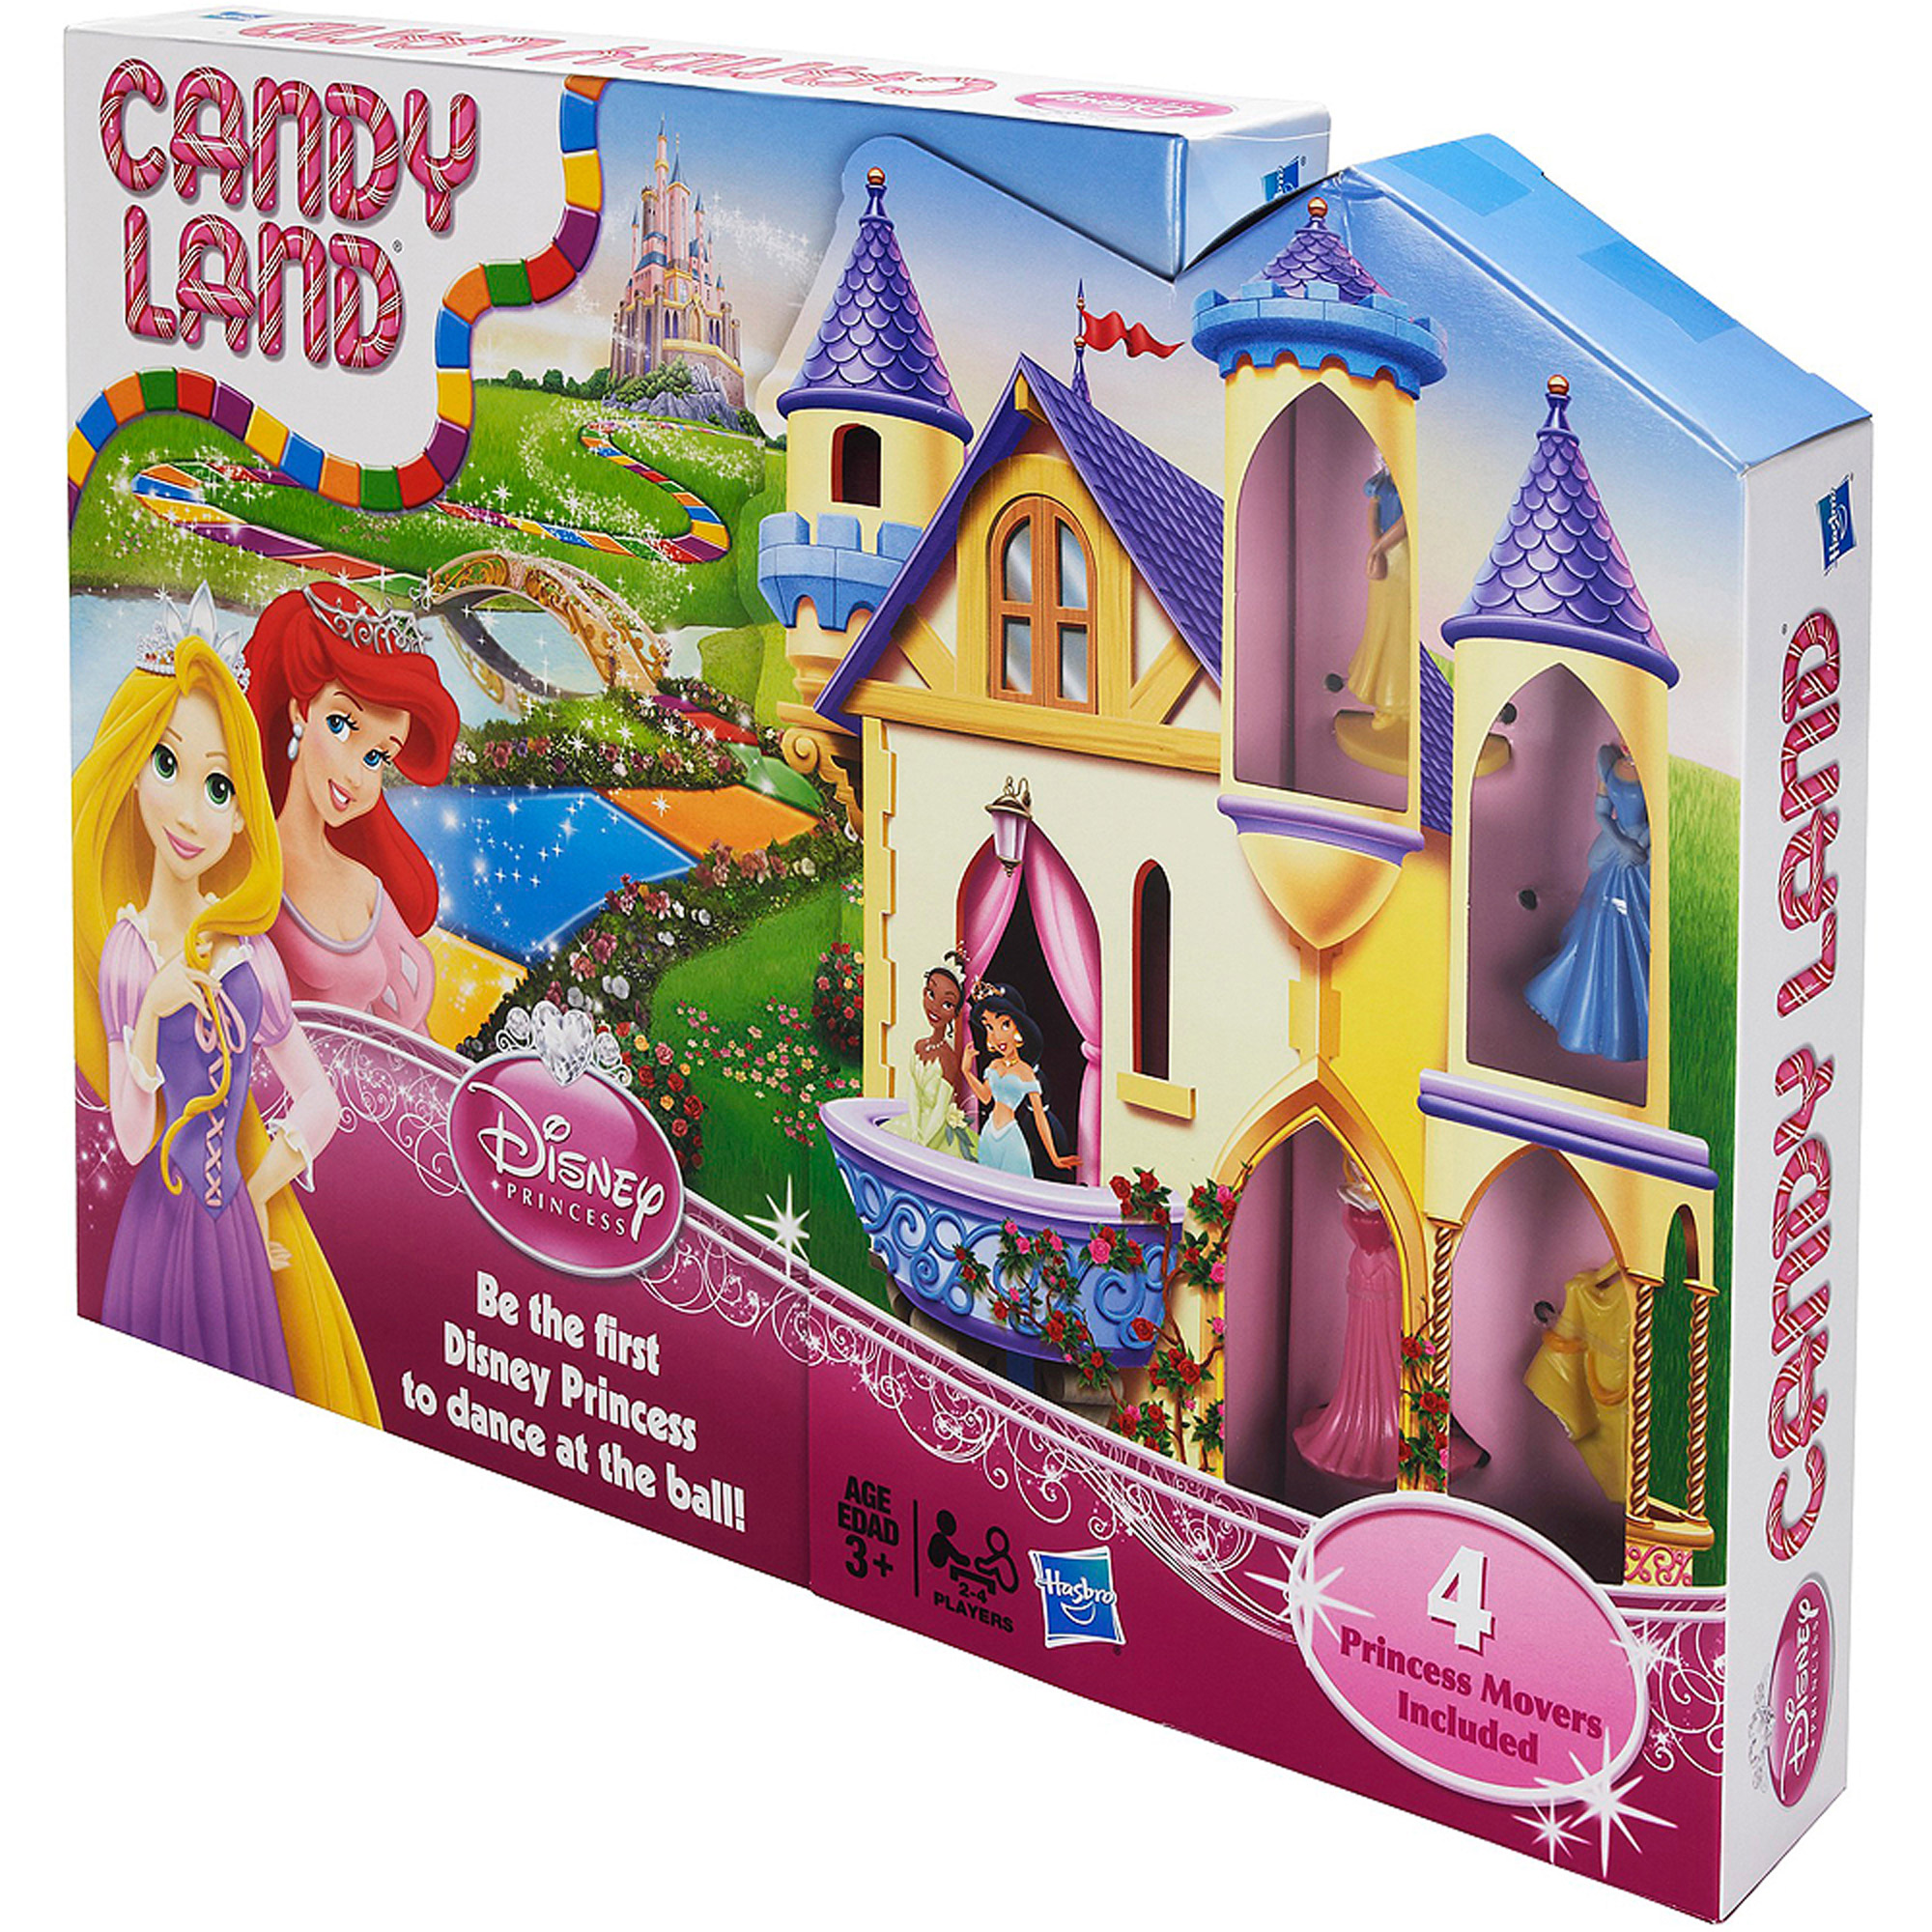 Candy Land Disney Princess Edition, For 2 to 4 players - image 4 of 9